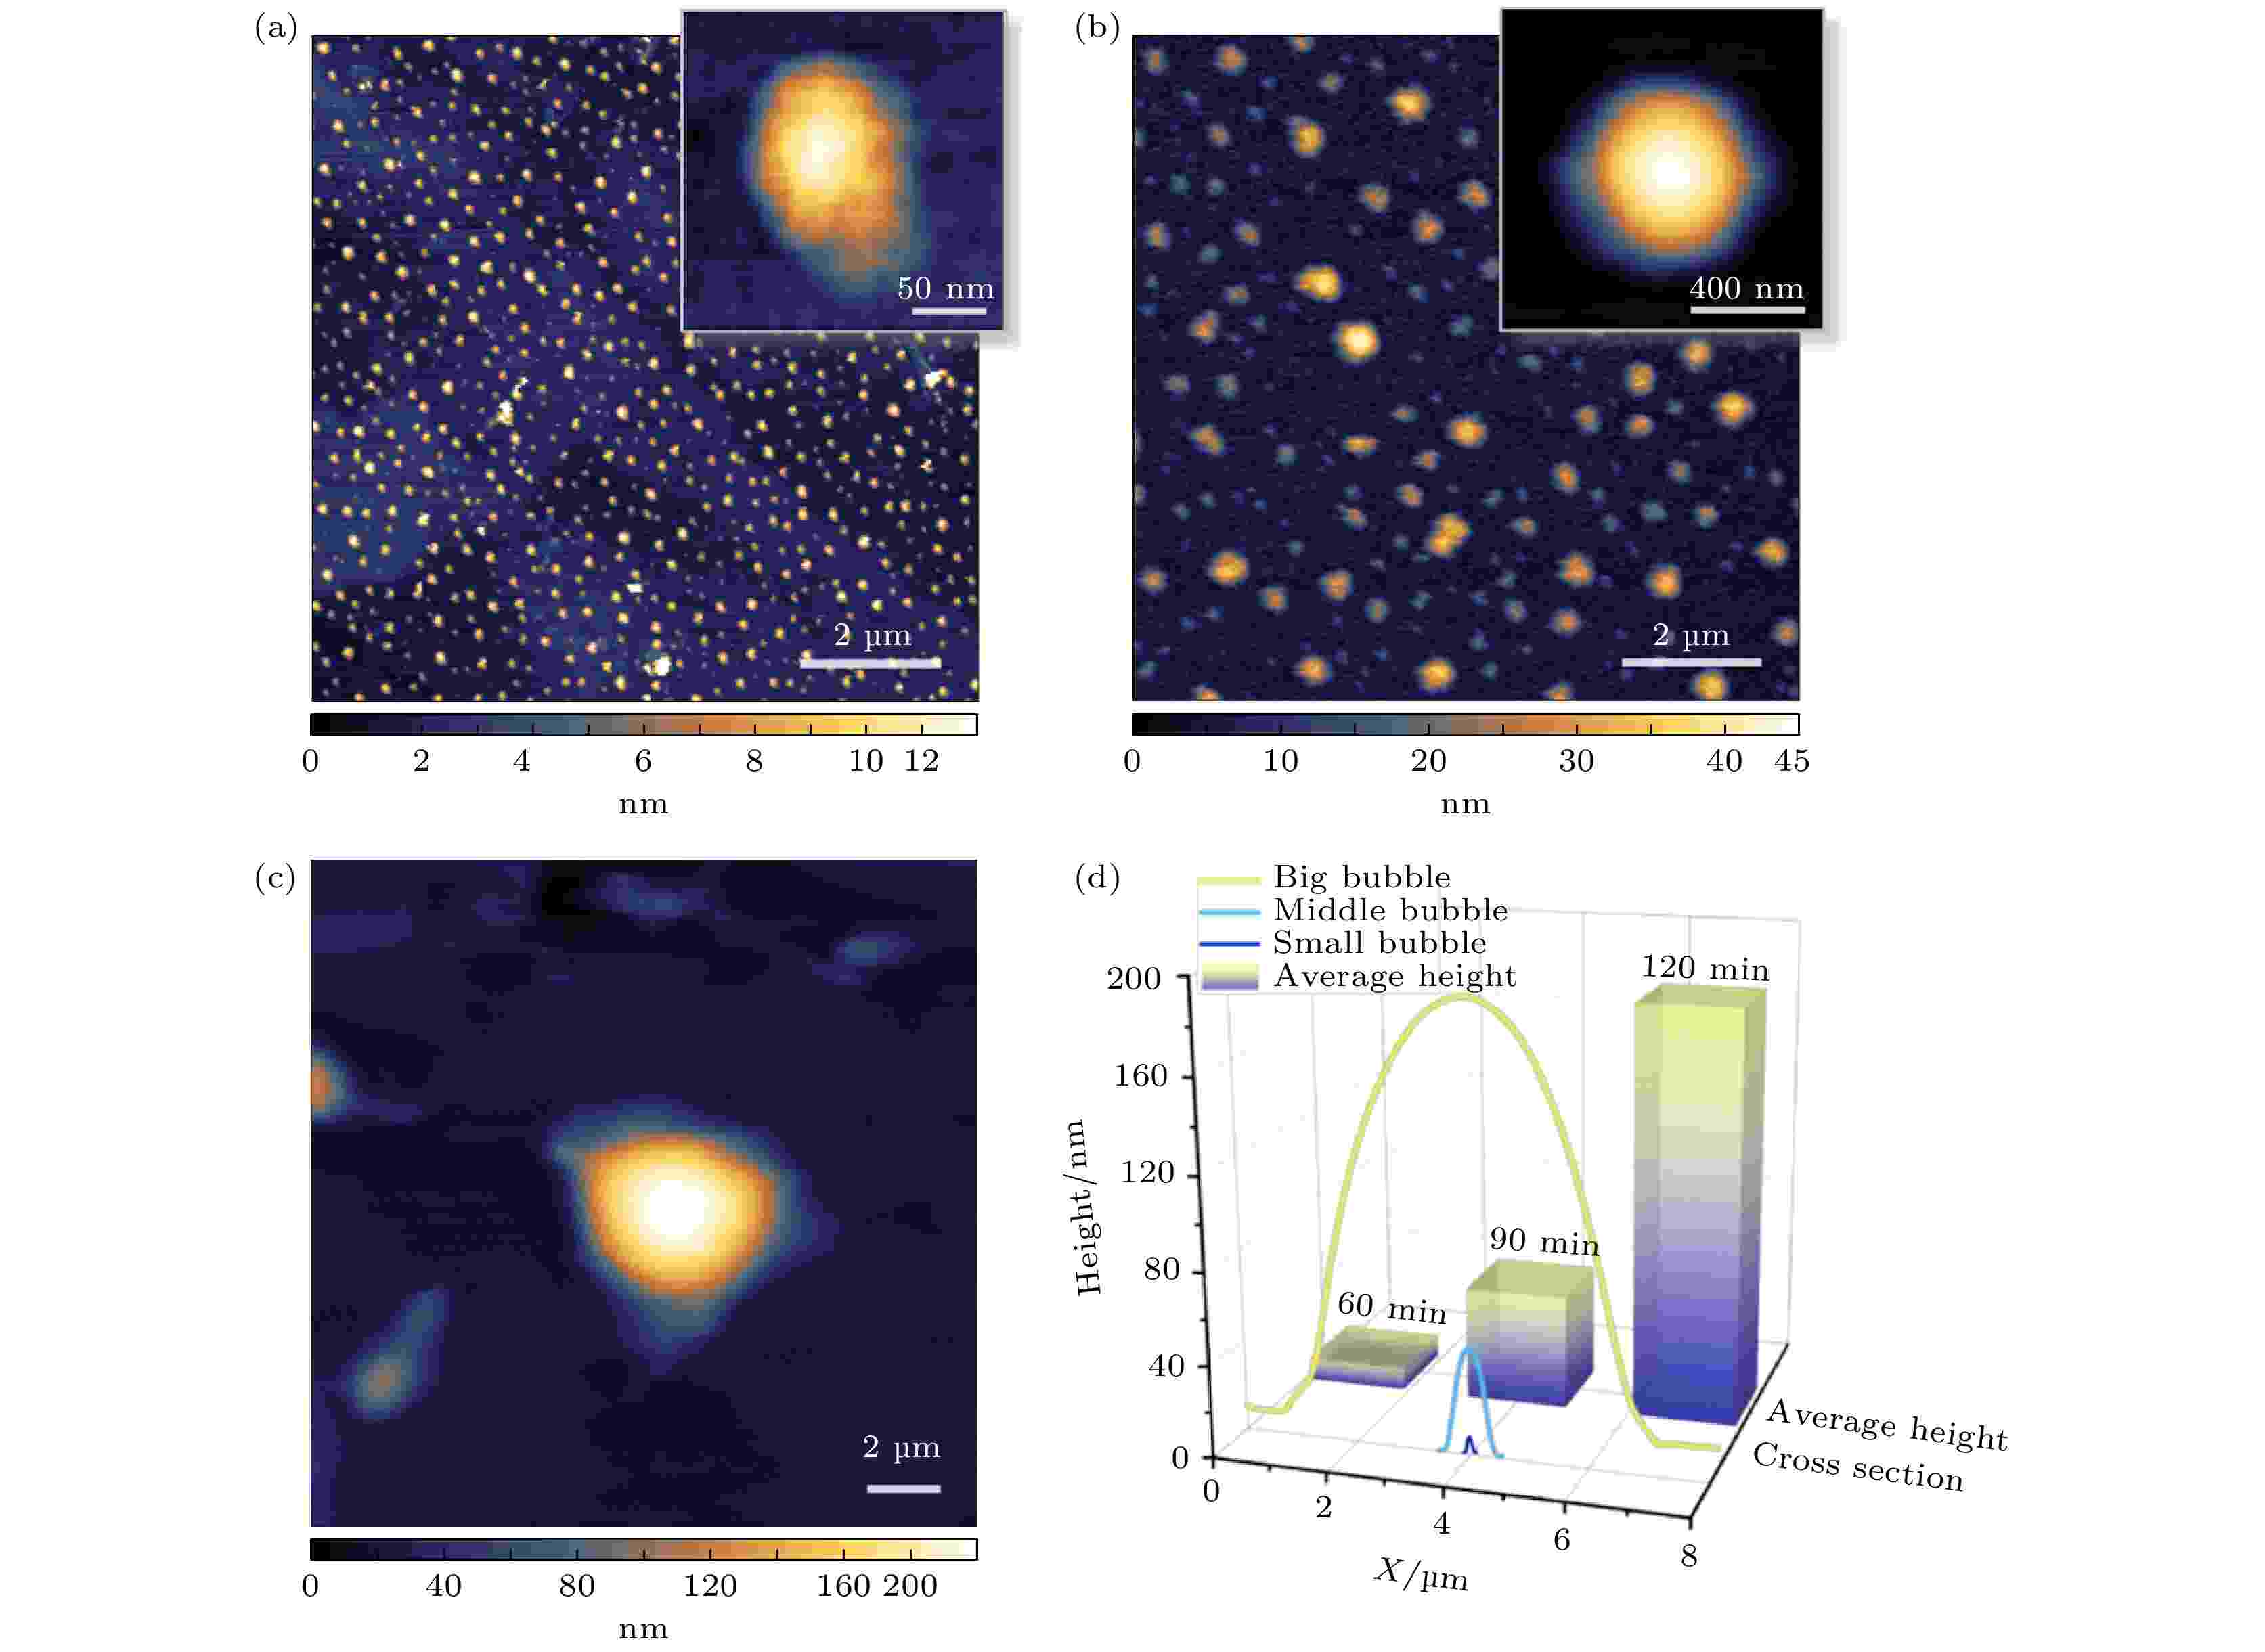 Distribution of h-BN bubbles after hydrogen plasma treatment for different treatment duration. (a)−(c) AFM images of the h-BN bubbles after treated for 60, 90 and 120 min. Scale bar: 2 μm. The inserts in (a) and (b) are the AFM topography images of a single bubble corresponding to the processing time. The scale bar is 50 nm for insert in (a) and 400 nm for the insert in (b). (d) Cross-sectional profiles of bubbles in inserts of panels (a) and (b) and panel (c). The histogram part is the average bubble height under different processing times according to statistics.